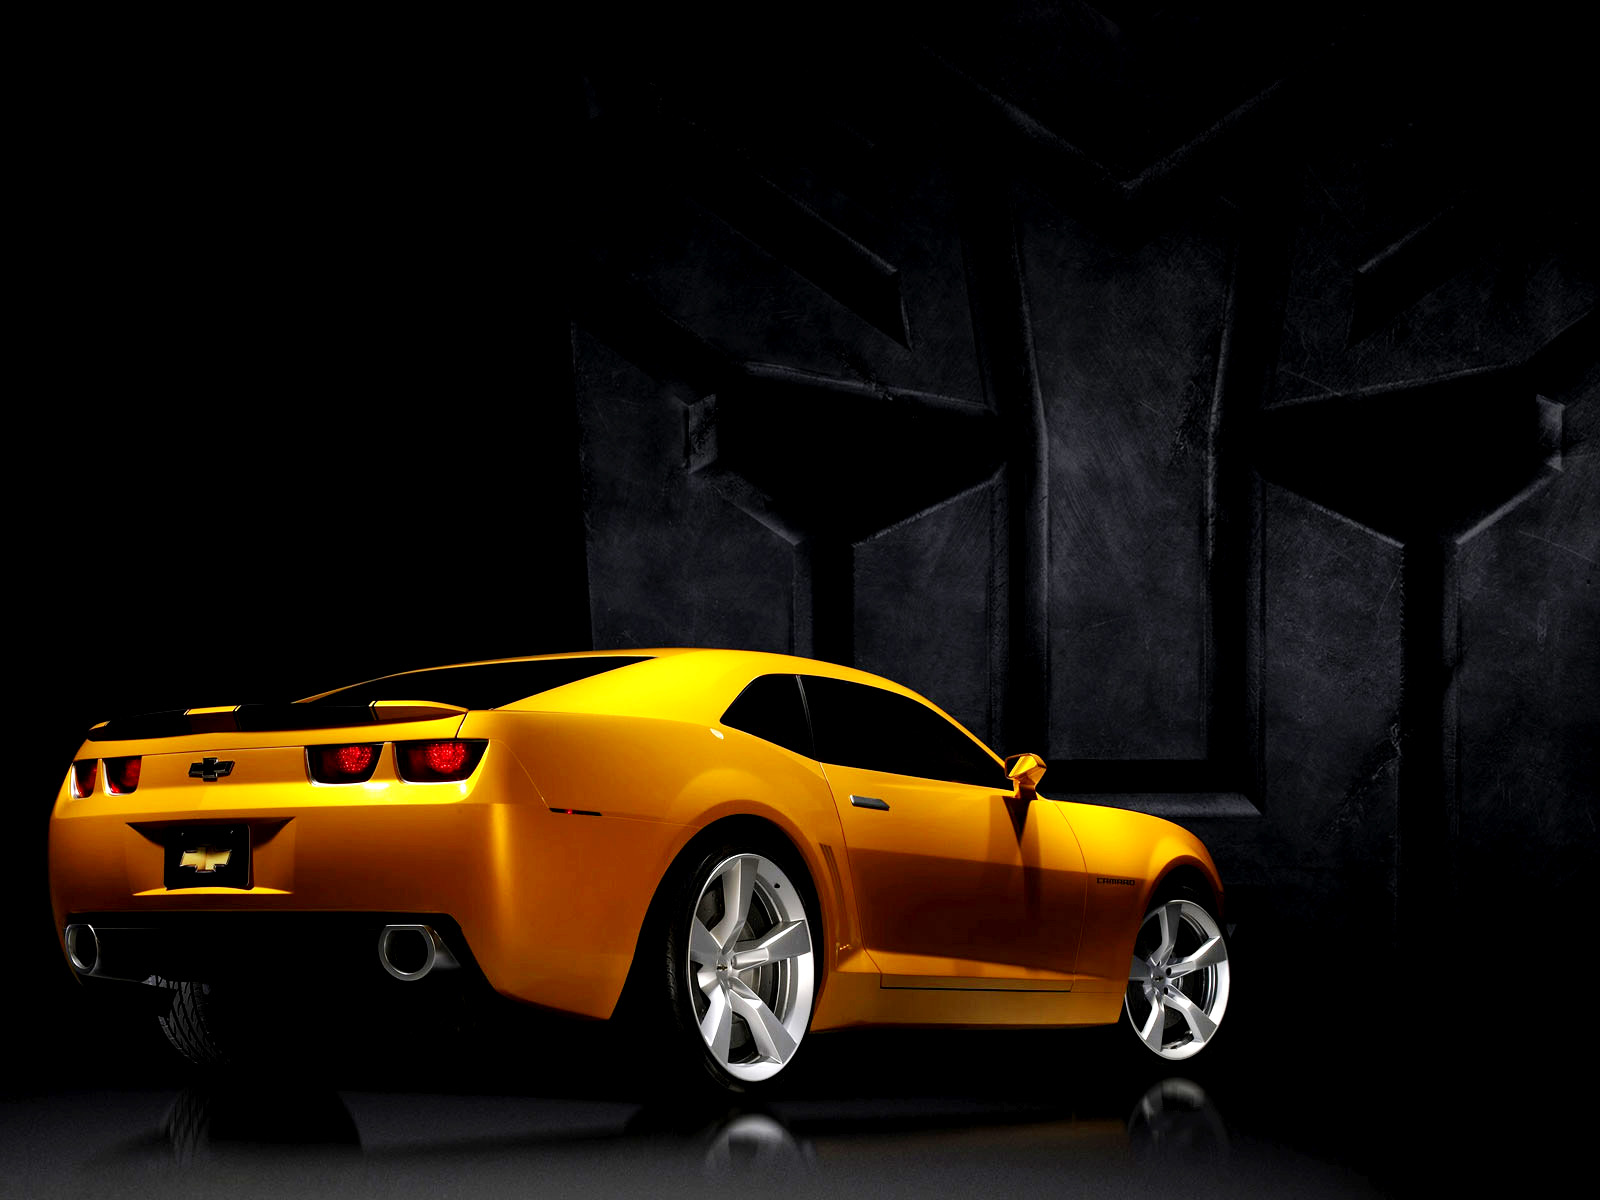 Bumblebee Transformers HD Wallpapers HQ Wallpapers   Wallpapers 1600x1200